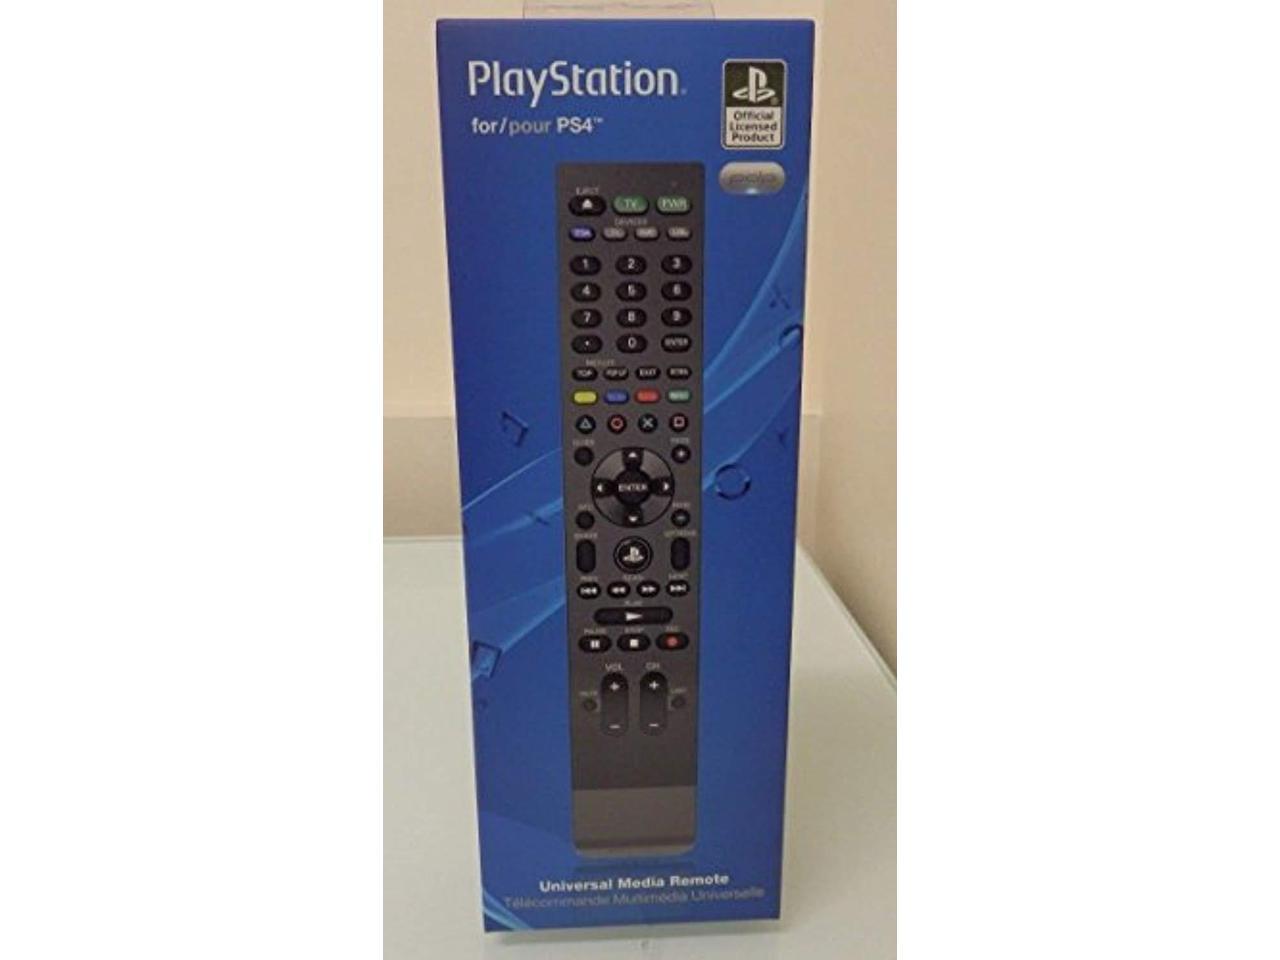 pdp universal media remote for playstation 4